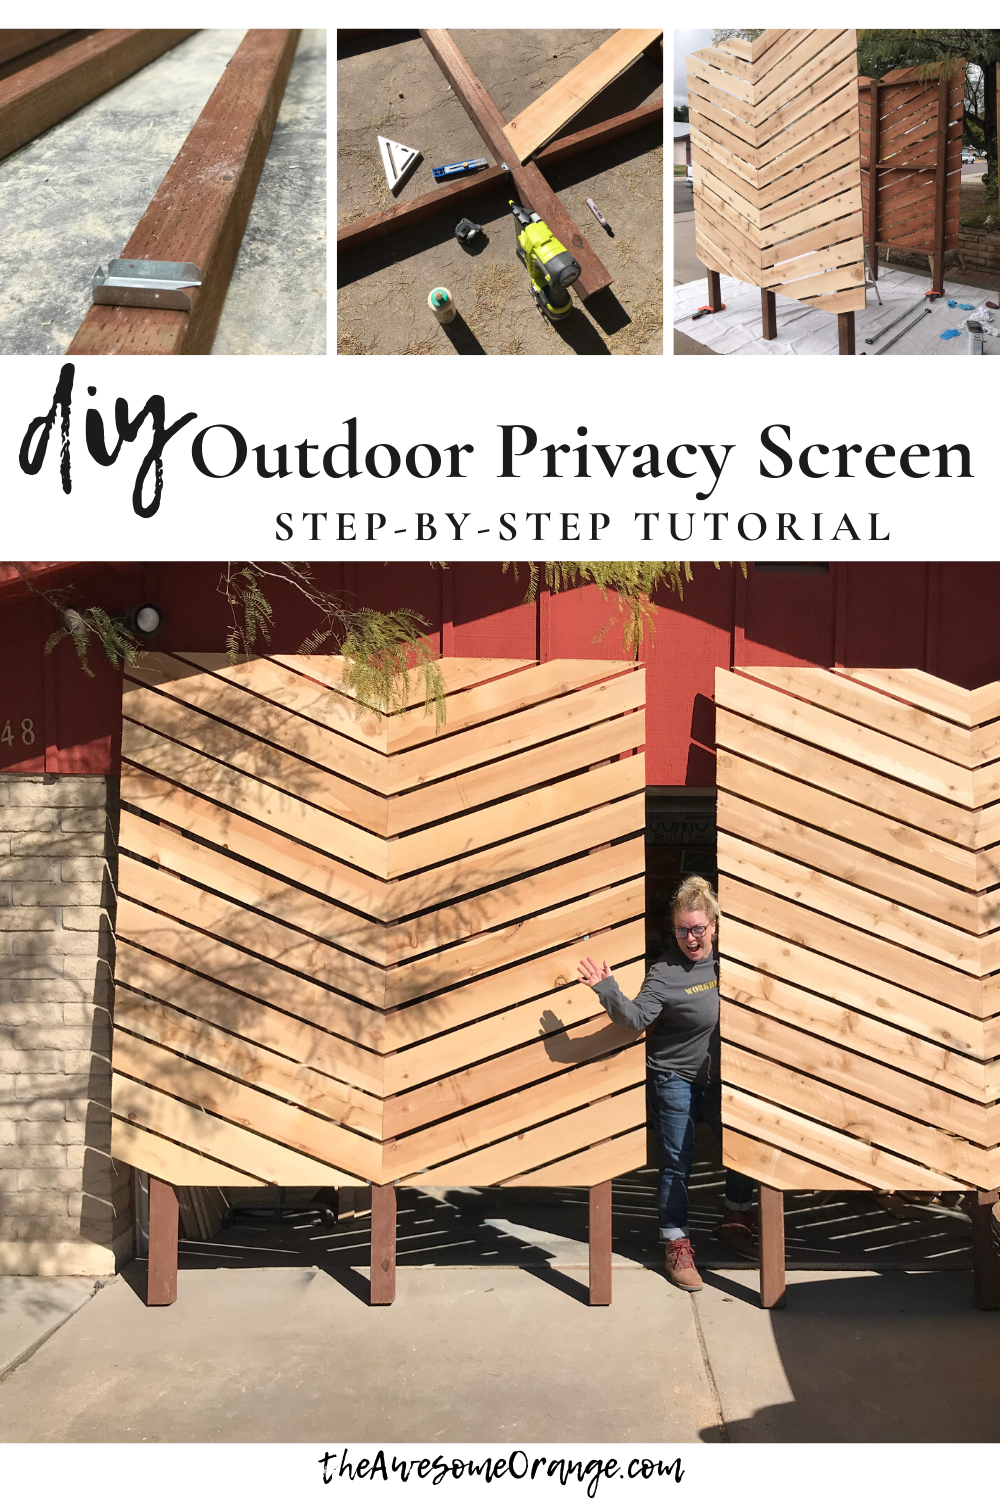 Diy Outdoor Privacy Screens The Awesome Orange